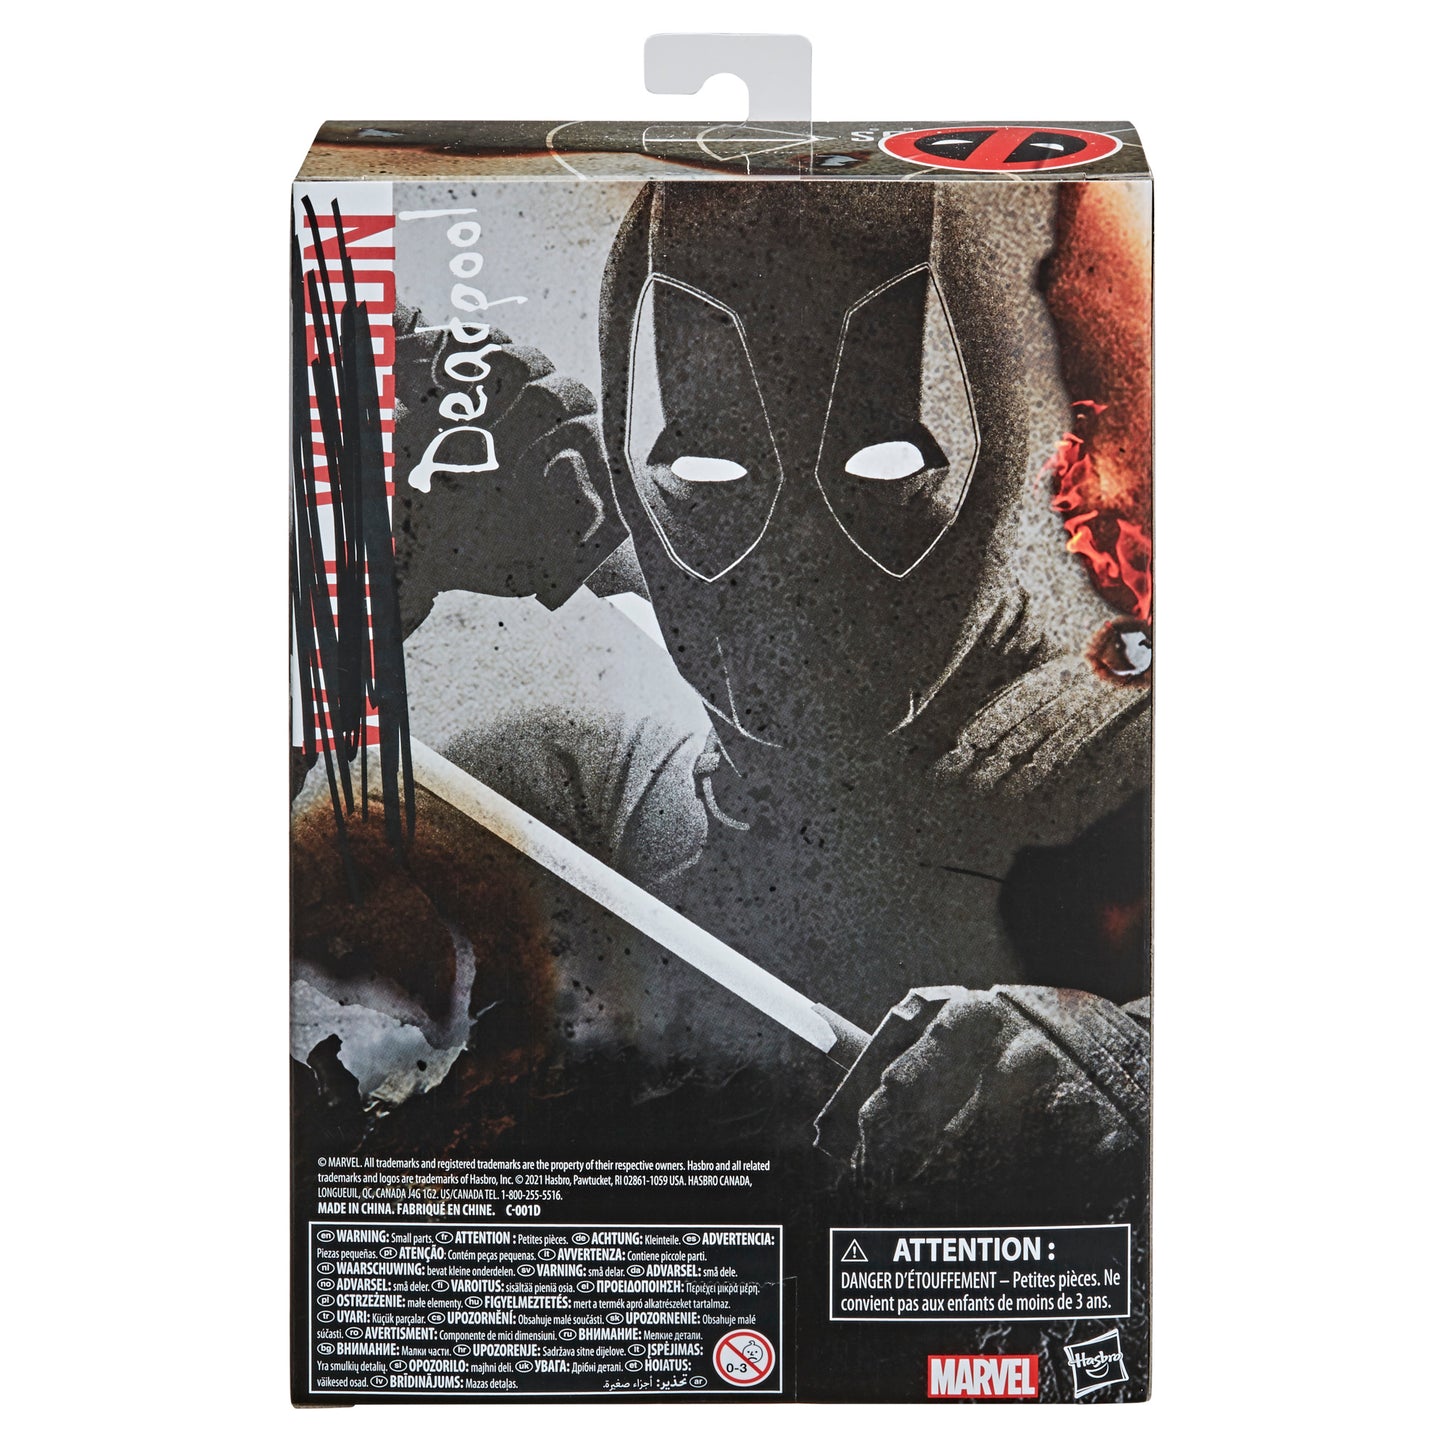 Marvel Legends Series 6-inch Premium Deadpool Action Figure Toy from Deadpool 2 Movie and 11 Accessories (Exclusive)